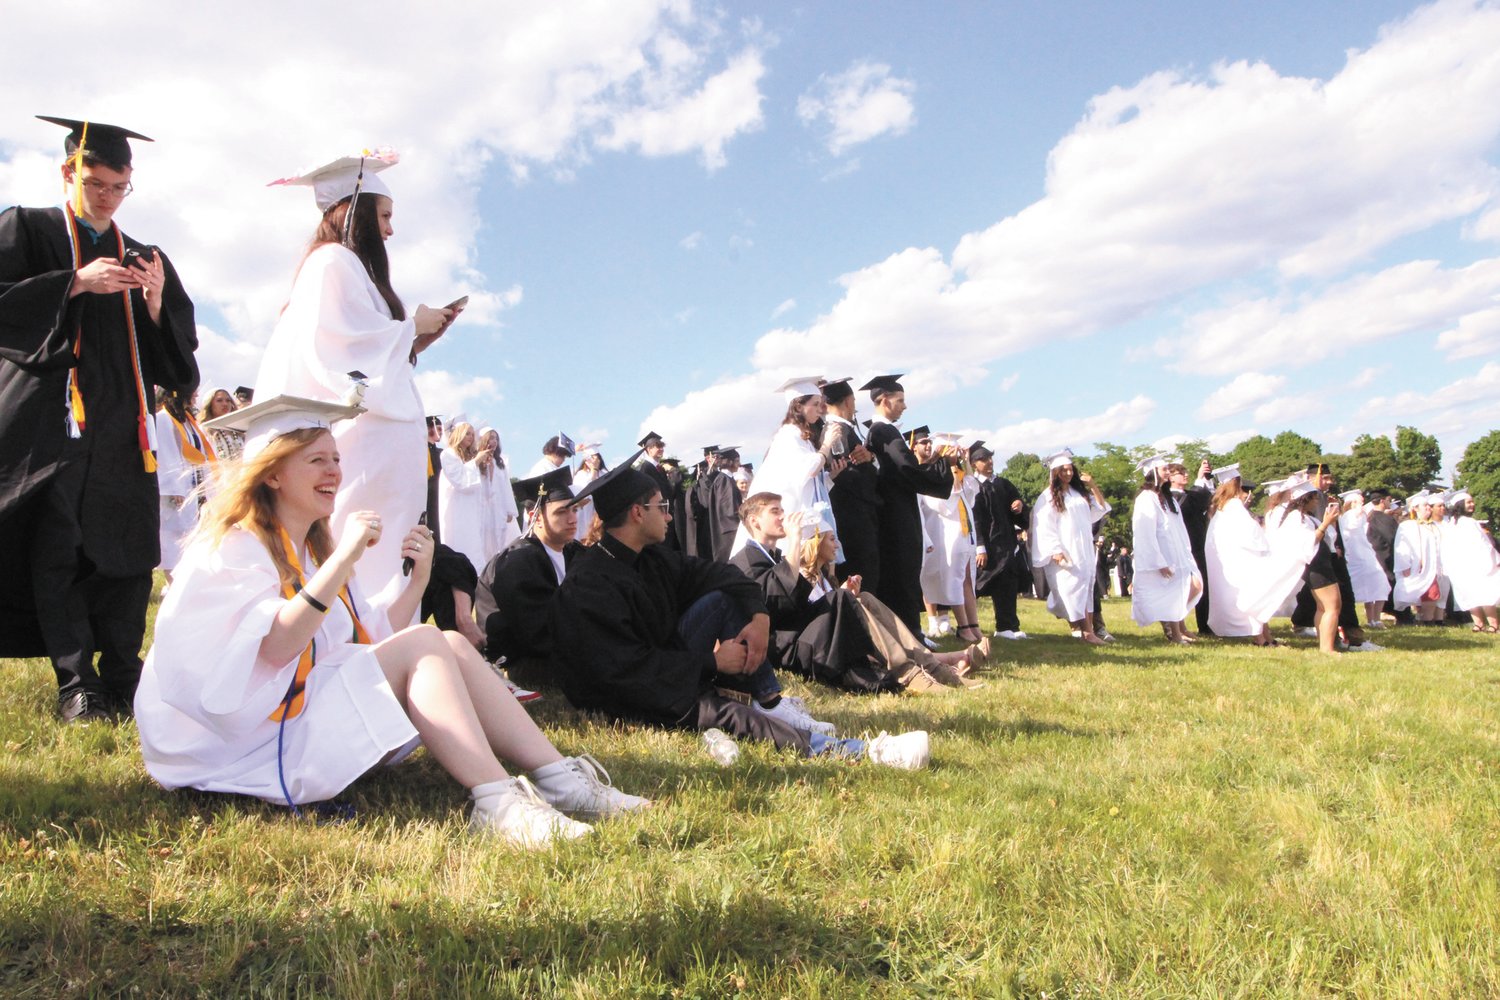 WAITING IT OUT: Pilgrim seniors line up in preparation for the procession and the beginning of the ceremony.